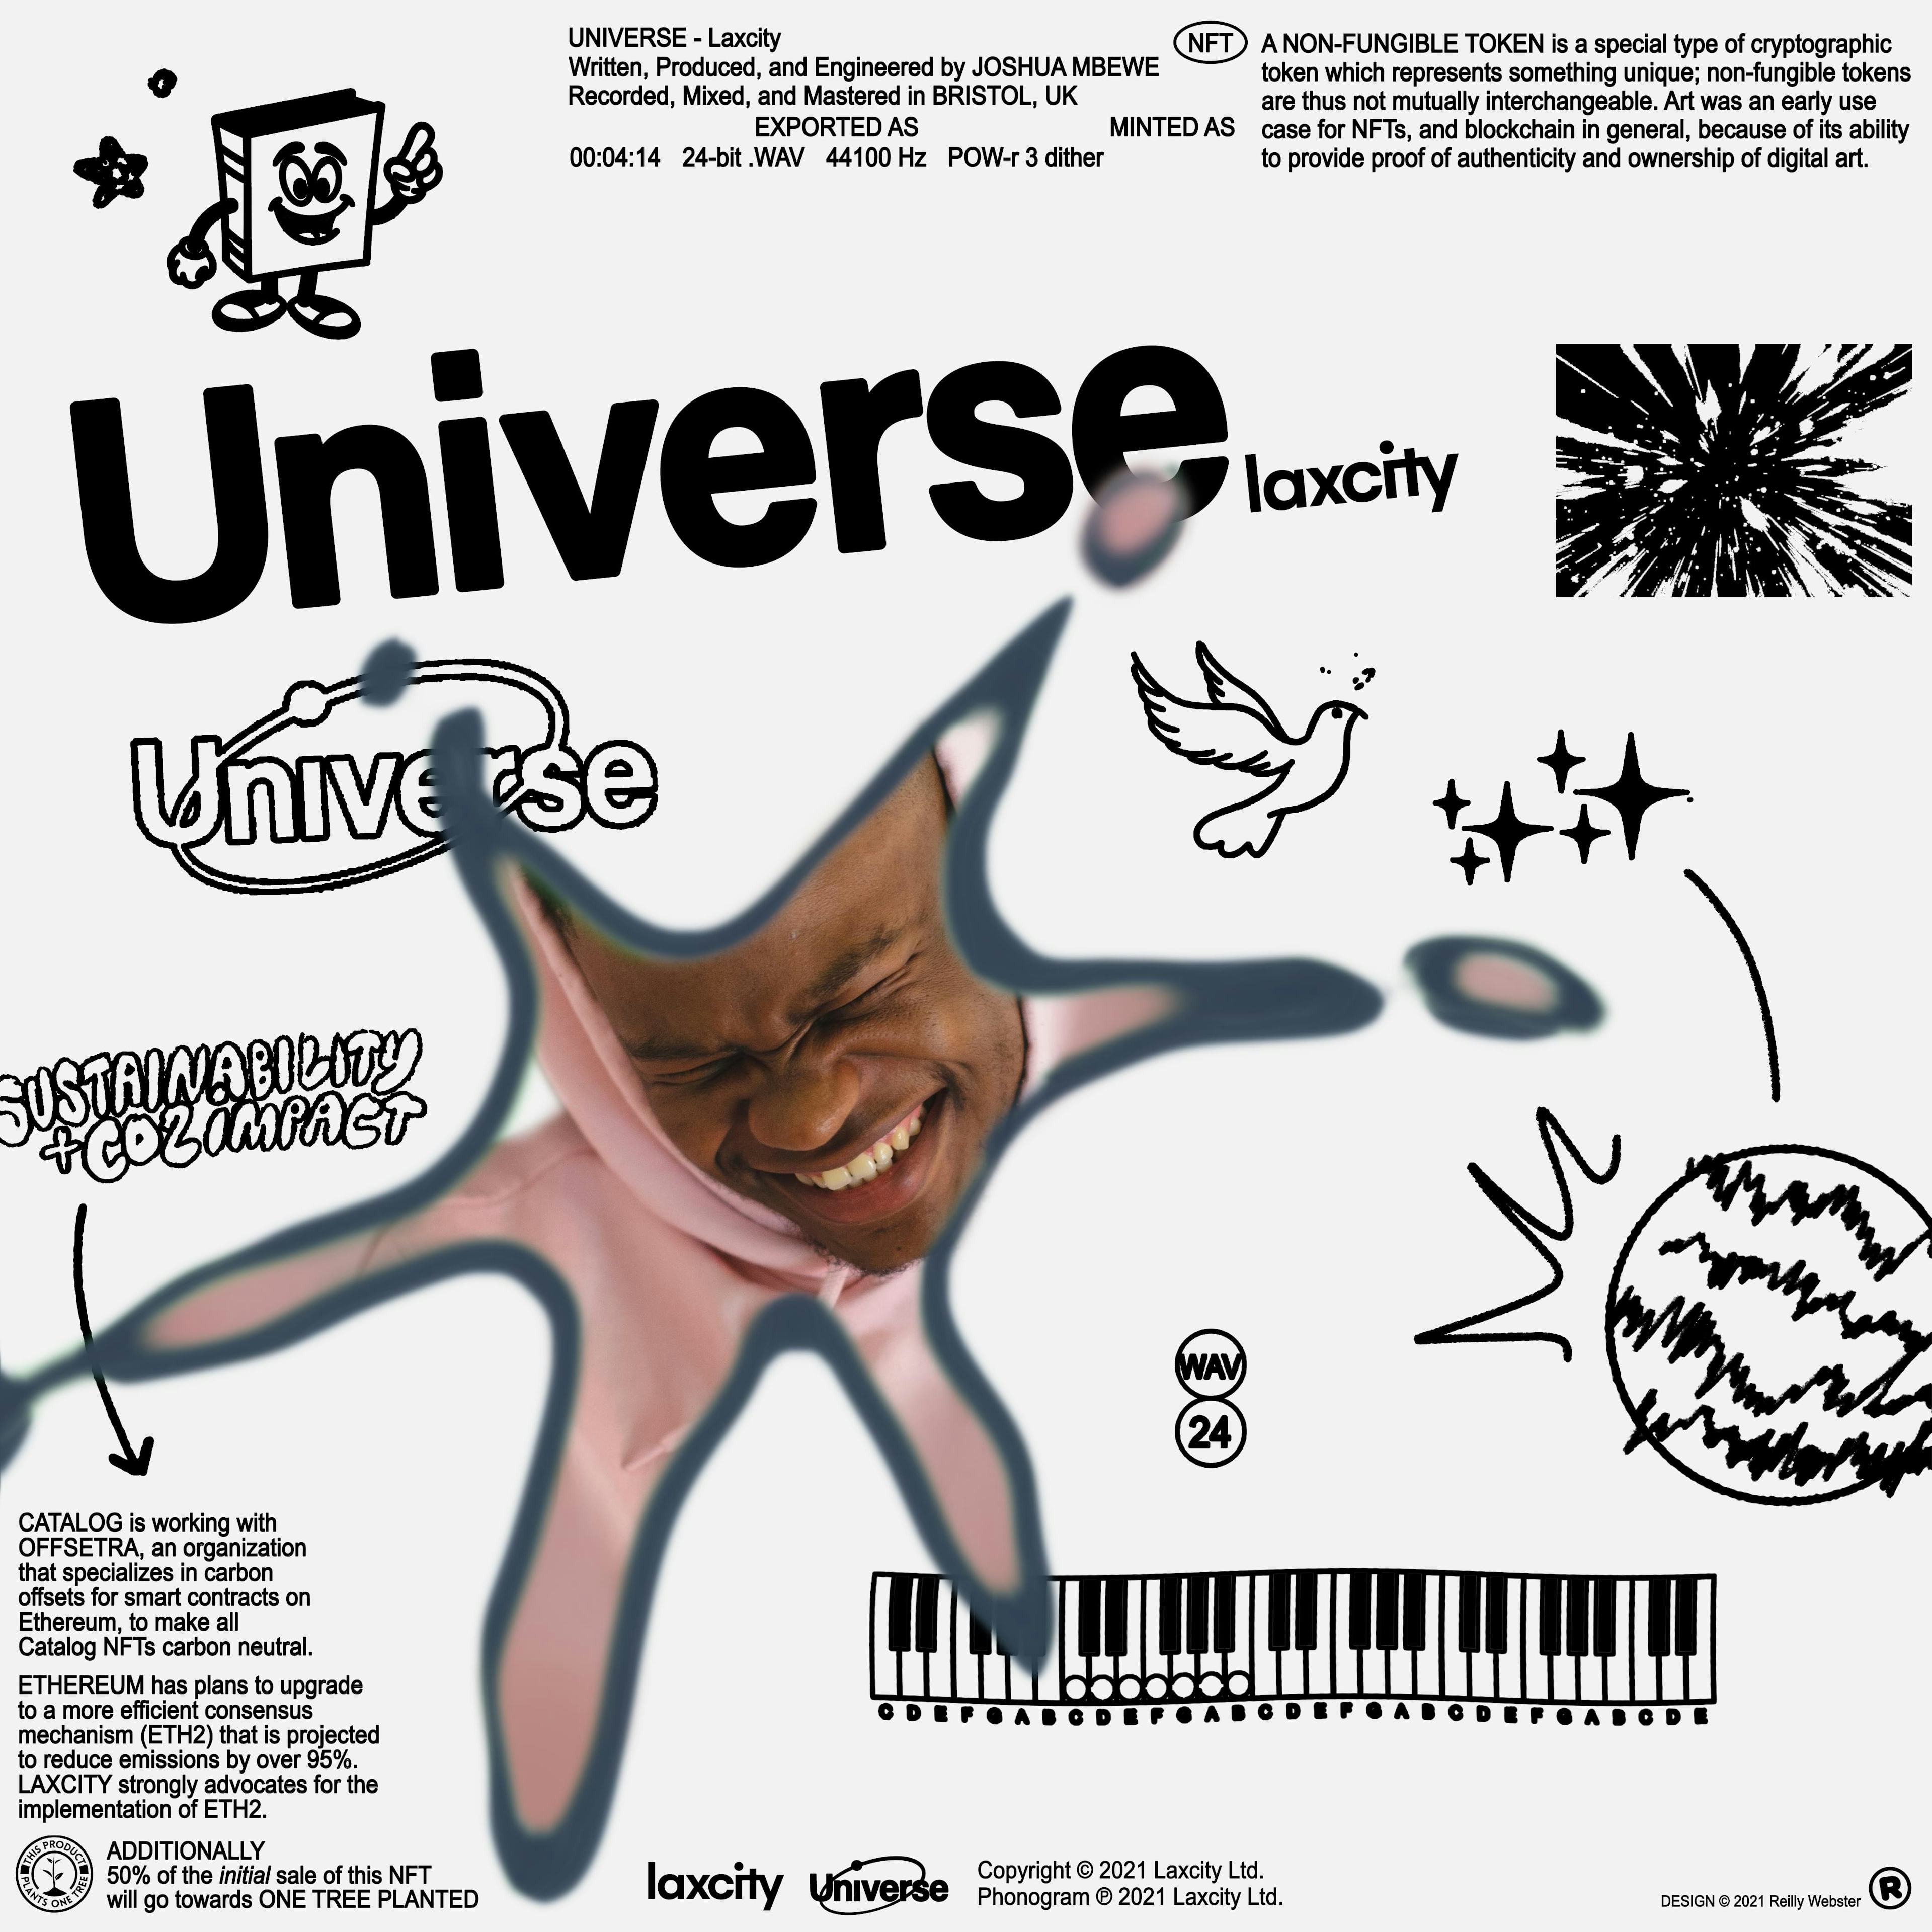 Cover art for Universe by laxcity